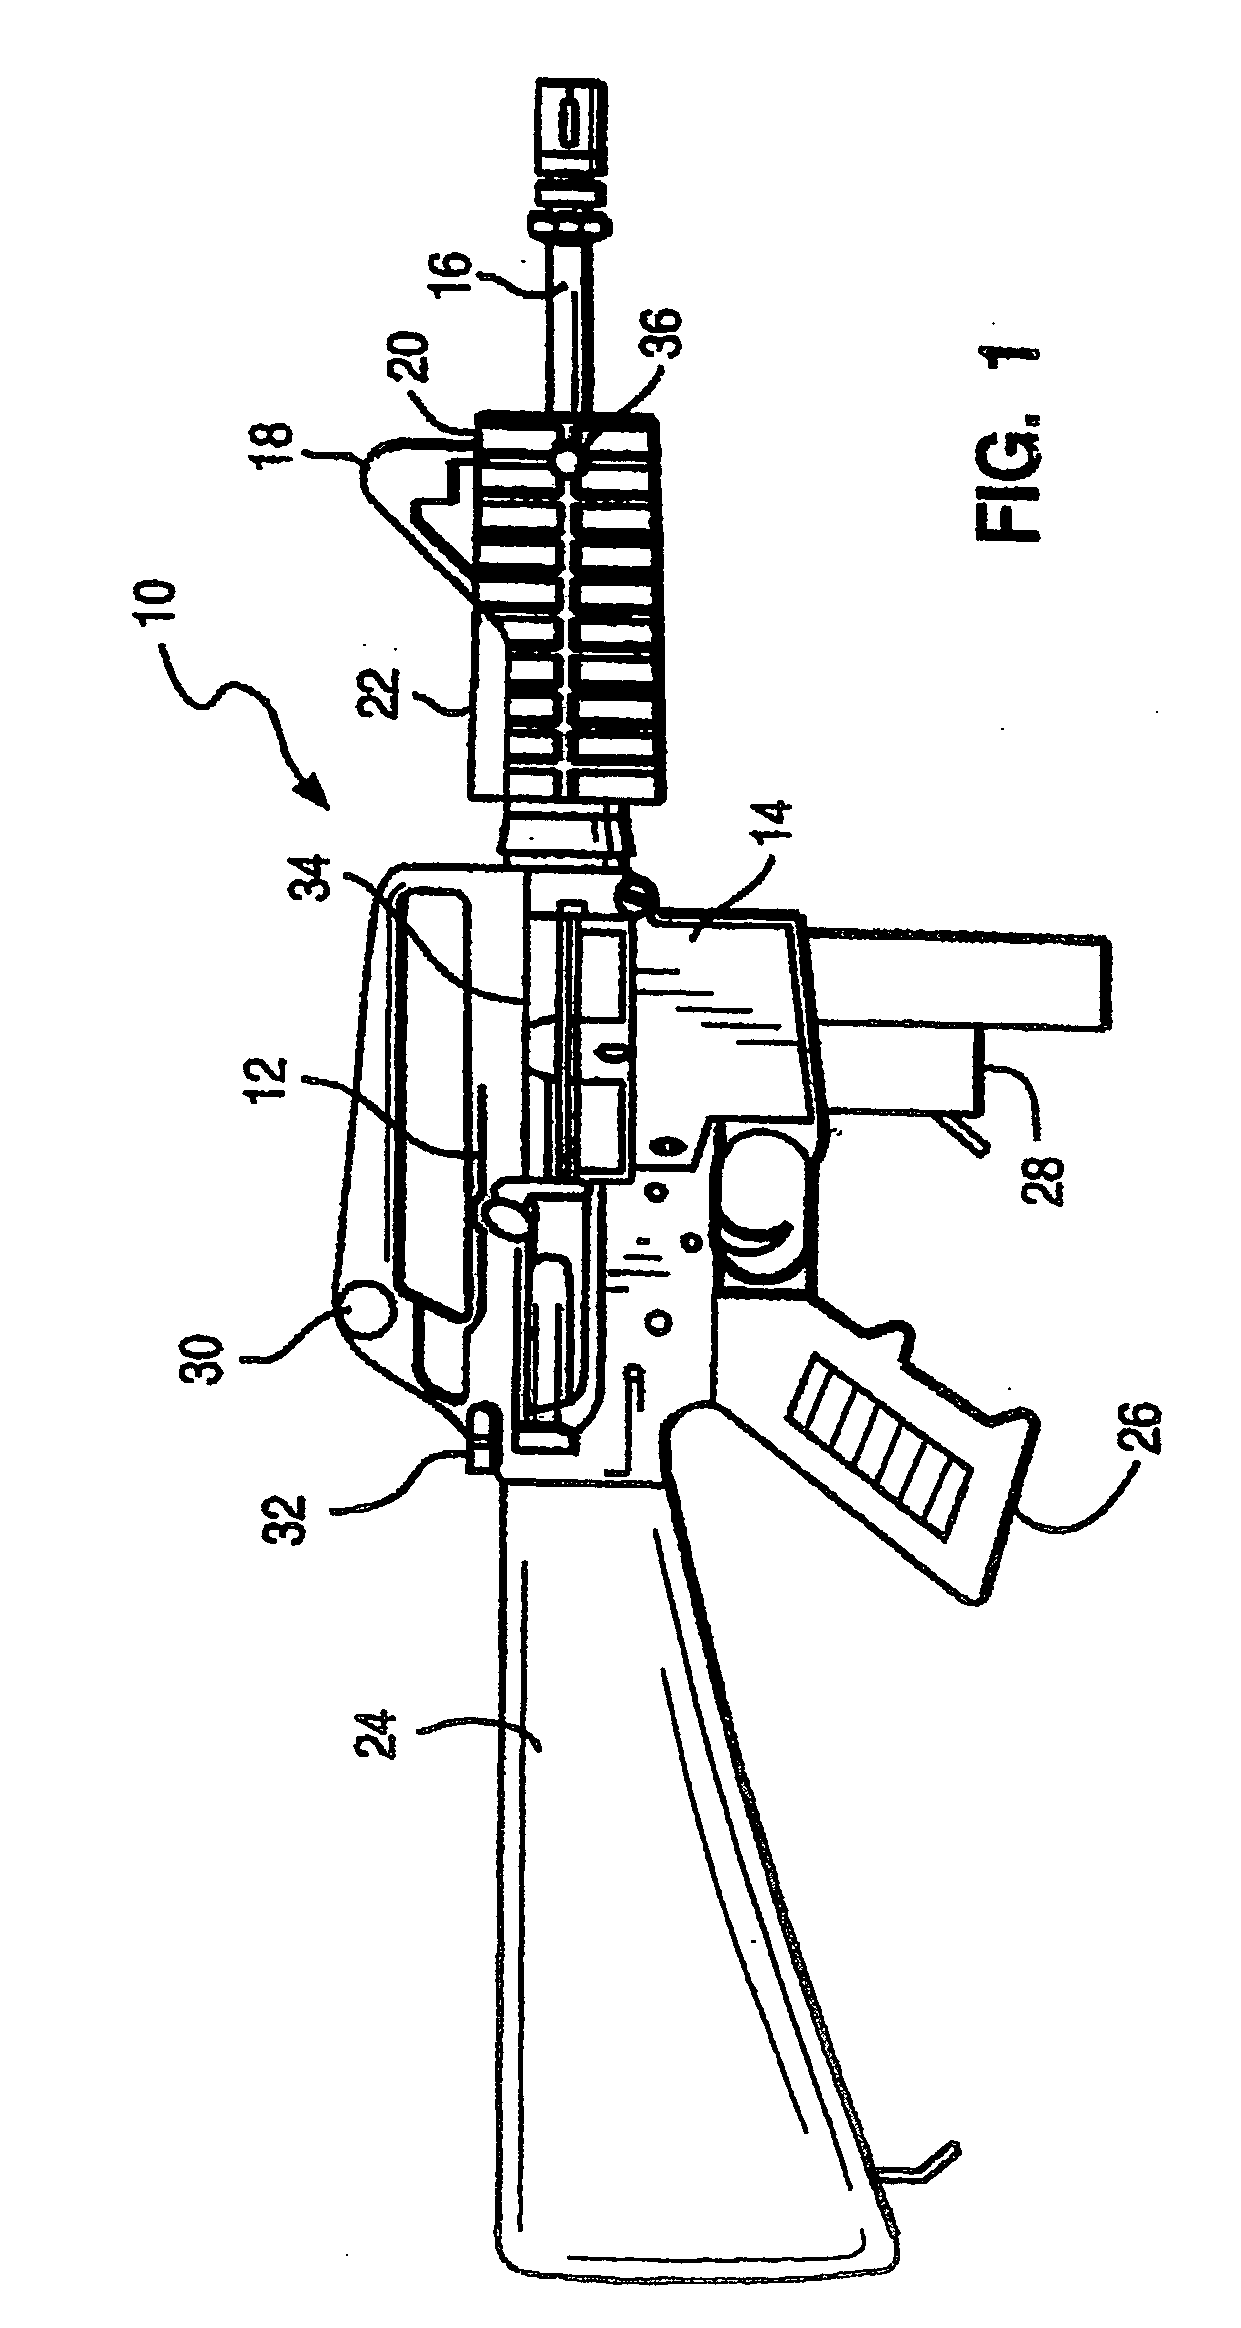 Self-cleaning gas operating system for a firearm